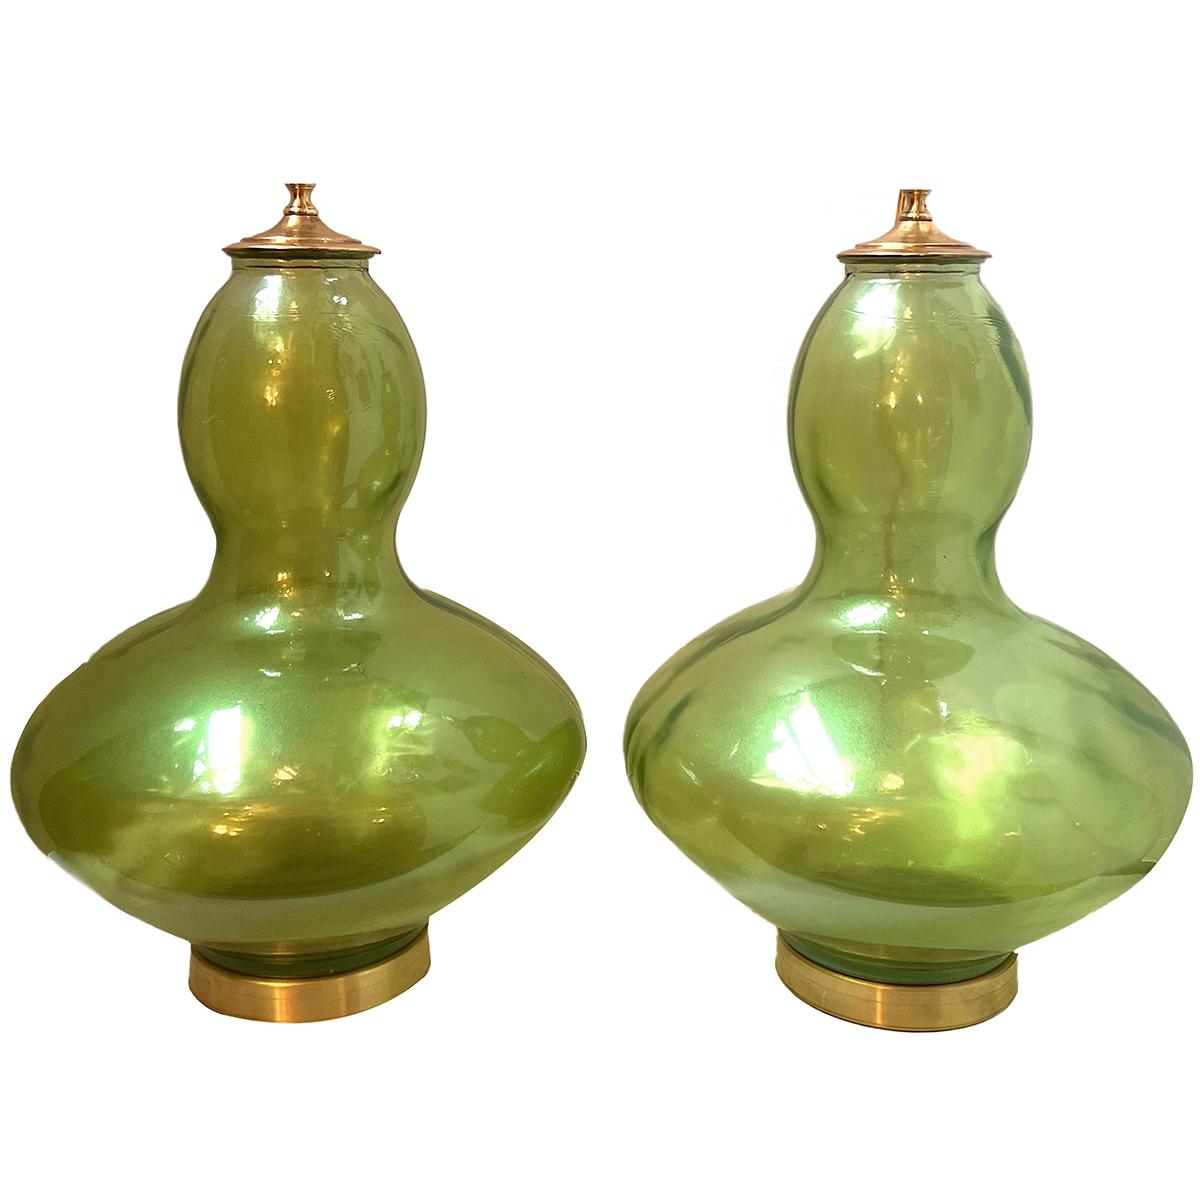 Pair of circa 1960’s blown glass Murano lamps with gilt bases.

Measurements:
Height of body: 20.5